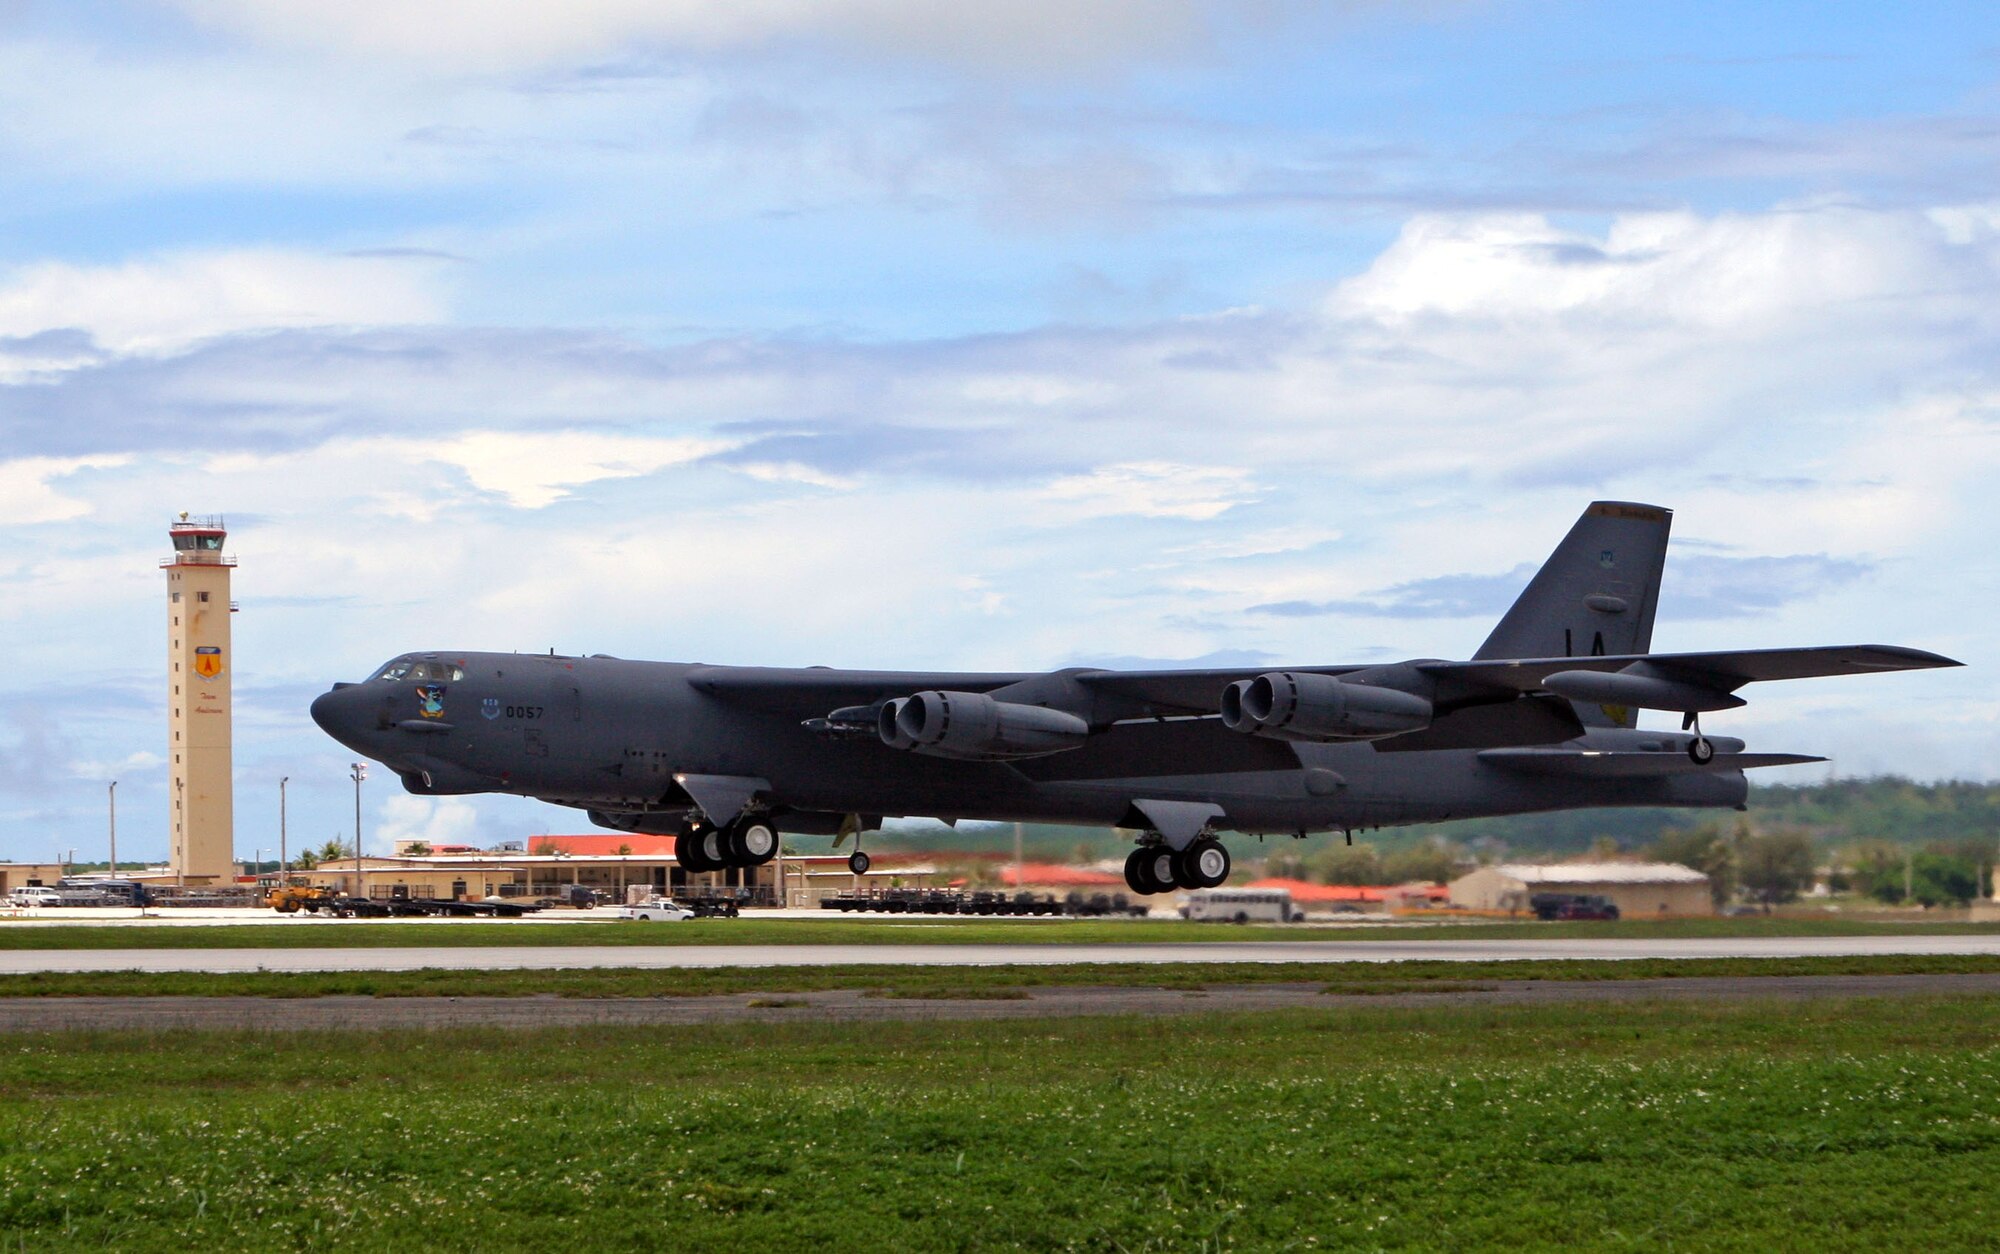 A B-52 Stratofortress takes off from Andersen Air Force Base, Guam to participate in an exercise scenario.  The aircraft, aircrew and maintenance personnel are deployed from Barksdale AFB, La., as part of the continuous bomber presence in the Pacific region. During their deployment here, the bomber squadron's participation in exercises will emphasize the U.S. bomber presence, demonstrating U.S. commitment to the Pacific region. 
(U.S. Air Force photo by Senior Master Sgt. Mahmoud Rasouliyan)